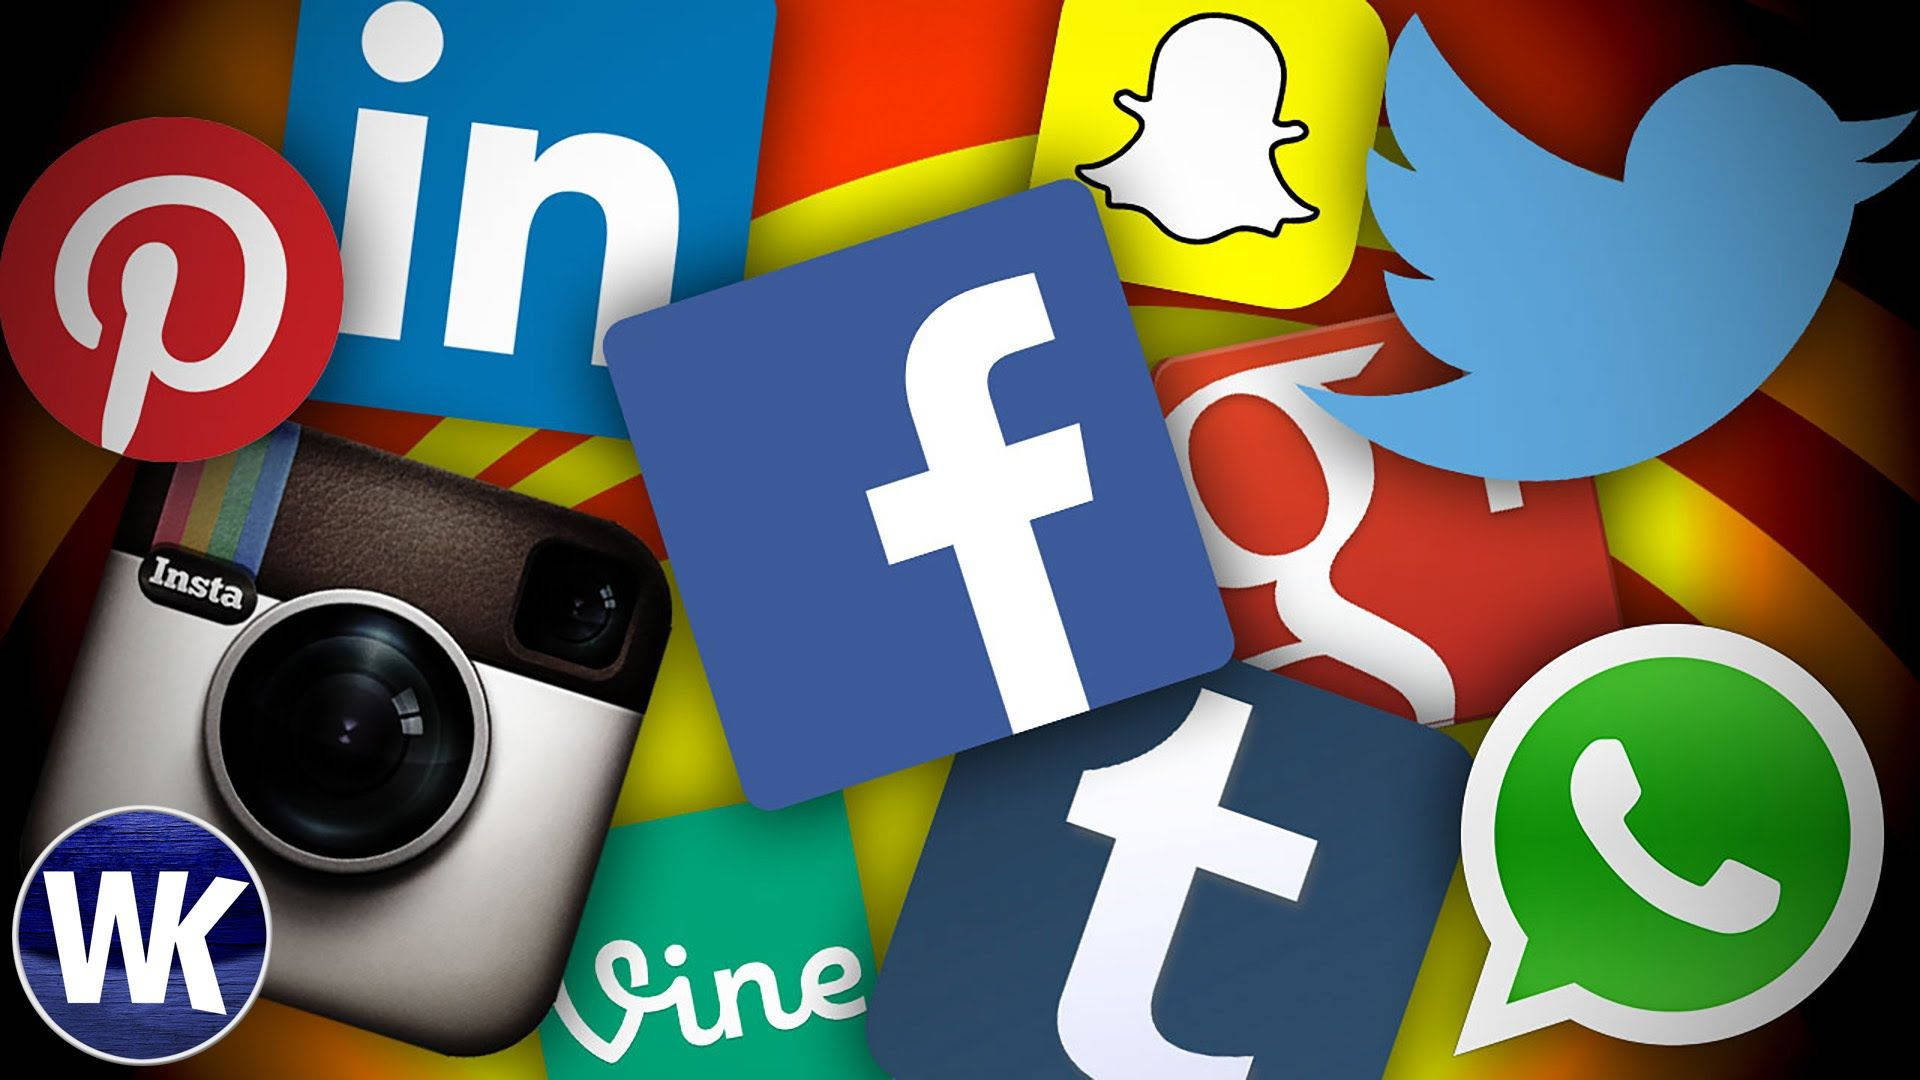 A Vibrant Collection Of Popular Social Network App Icons. Background